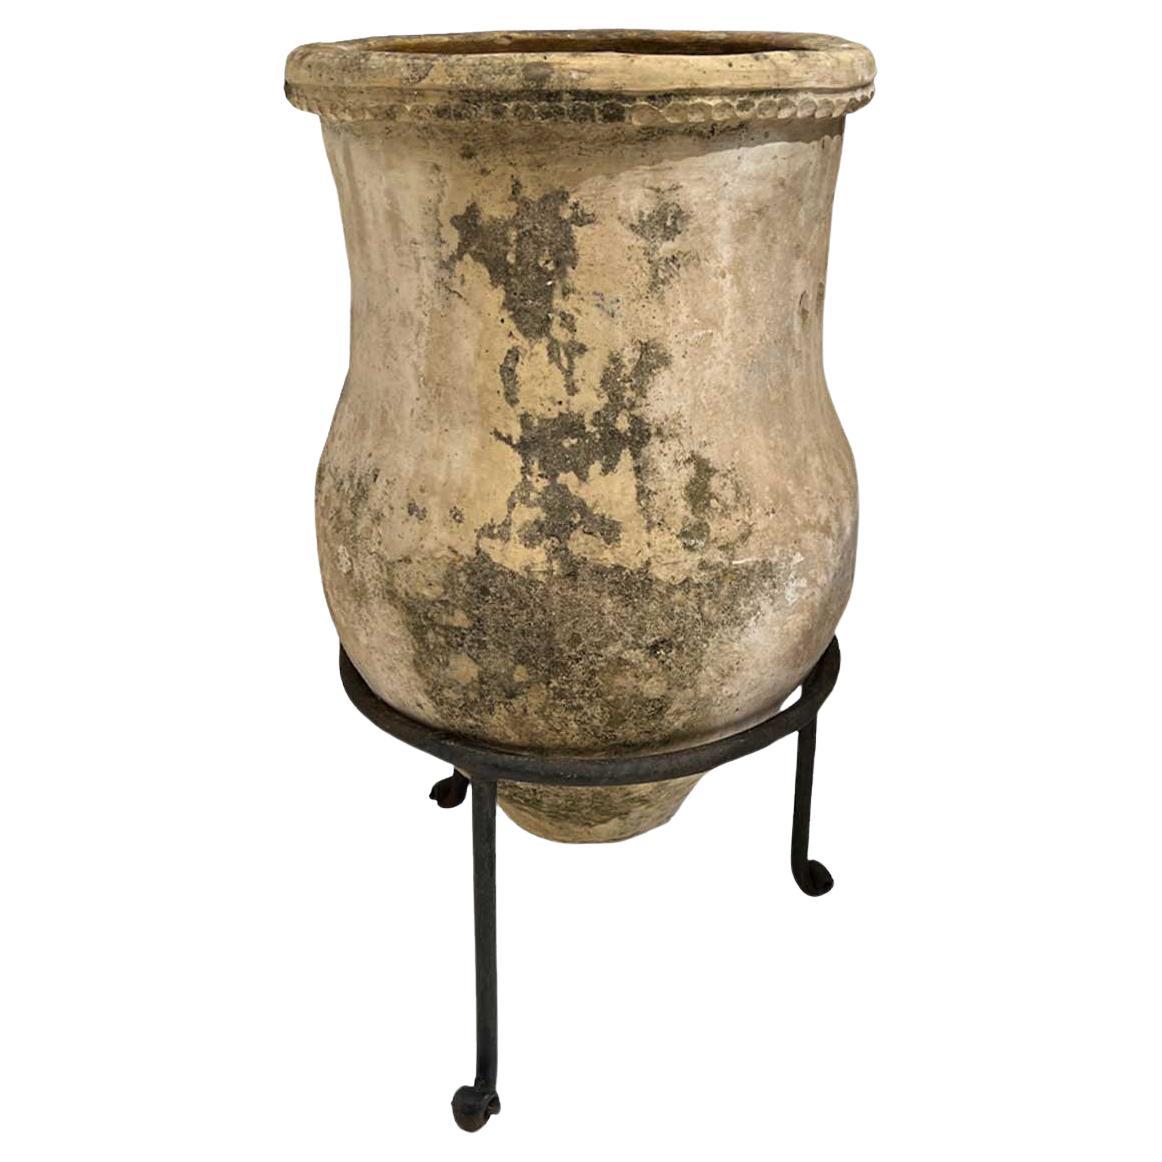 Antique Terrracotta Olive Jar on Stand For Sale